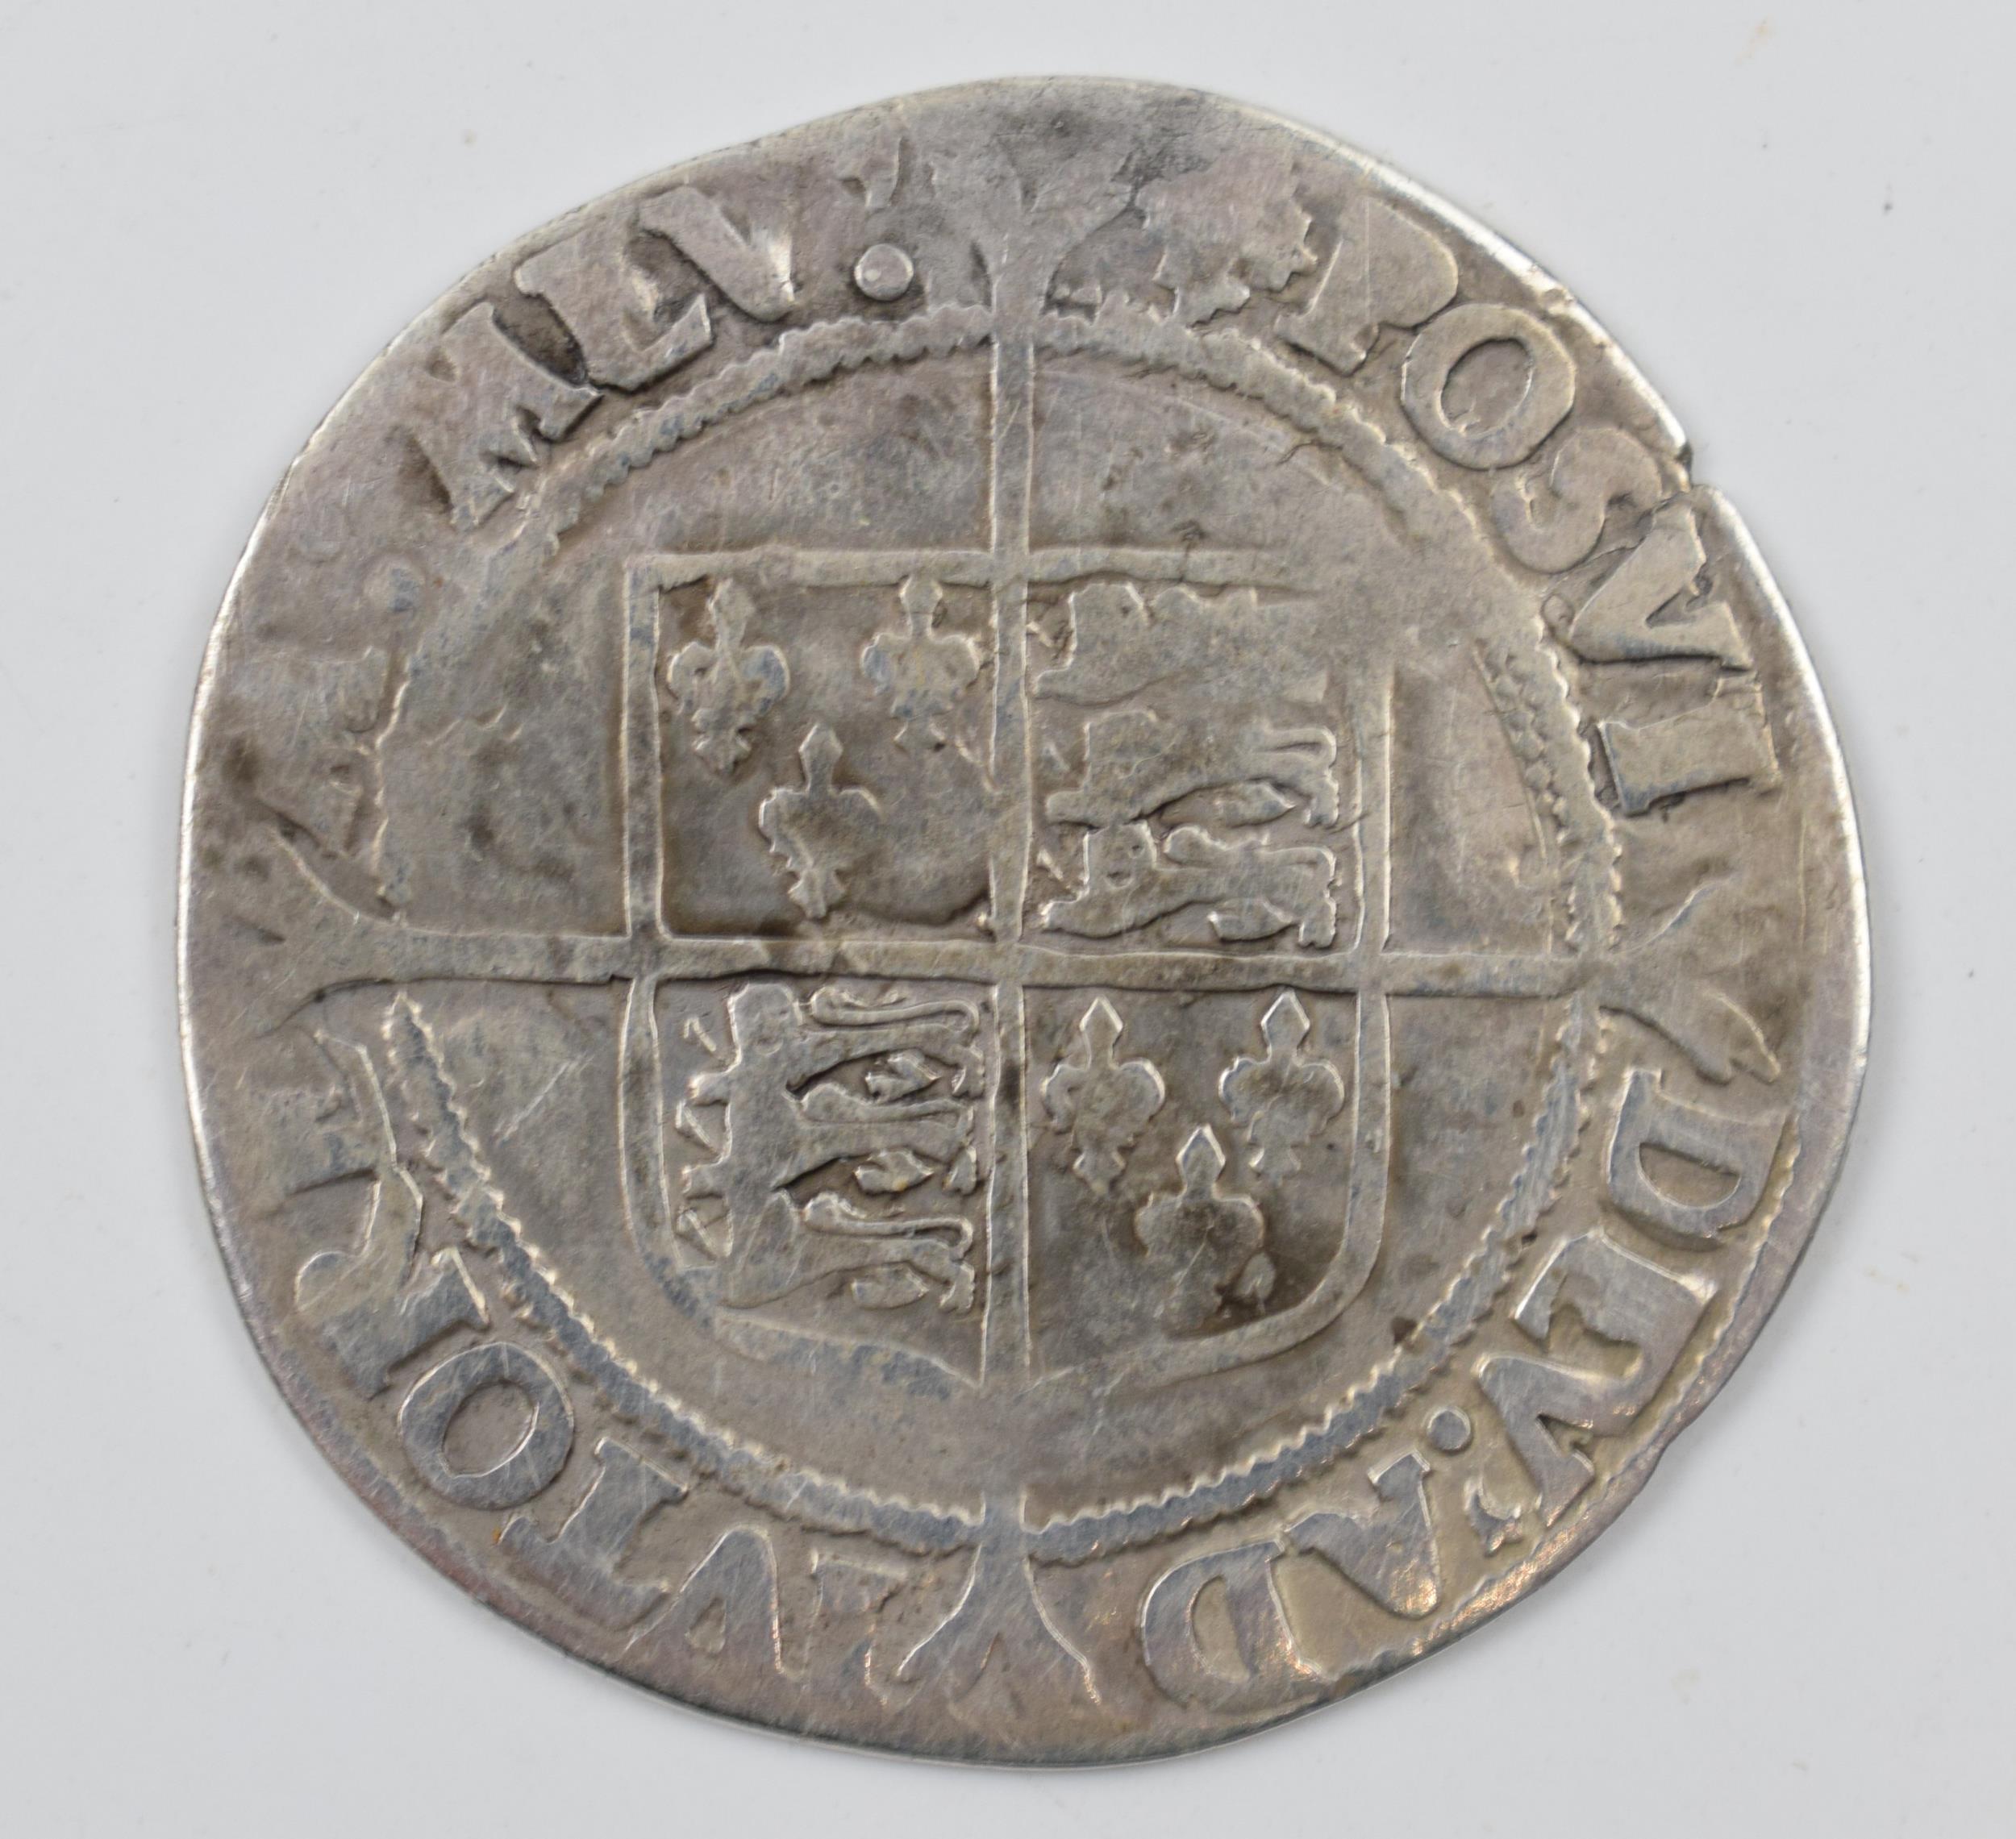 Queen Elizabeth I Silver Shilling 2nd issue 1560 - 61. Bust 3c. Full Flange. Diameter 31.9mm. Weight